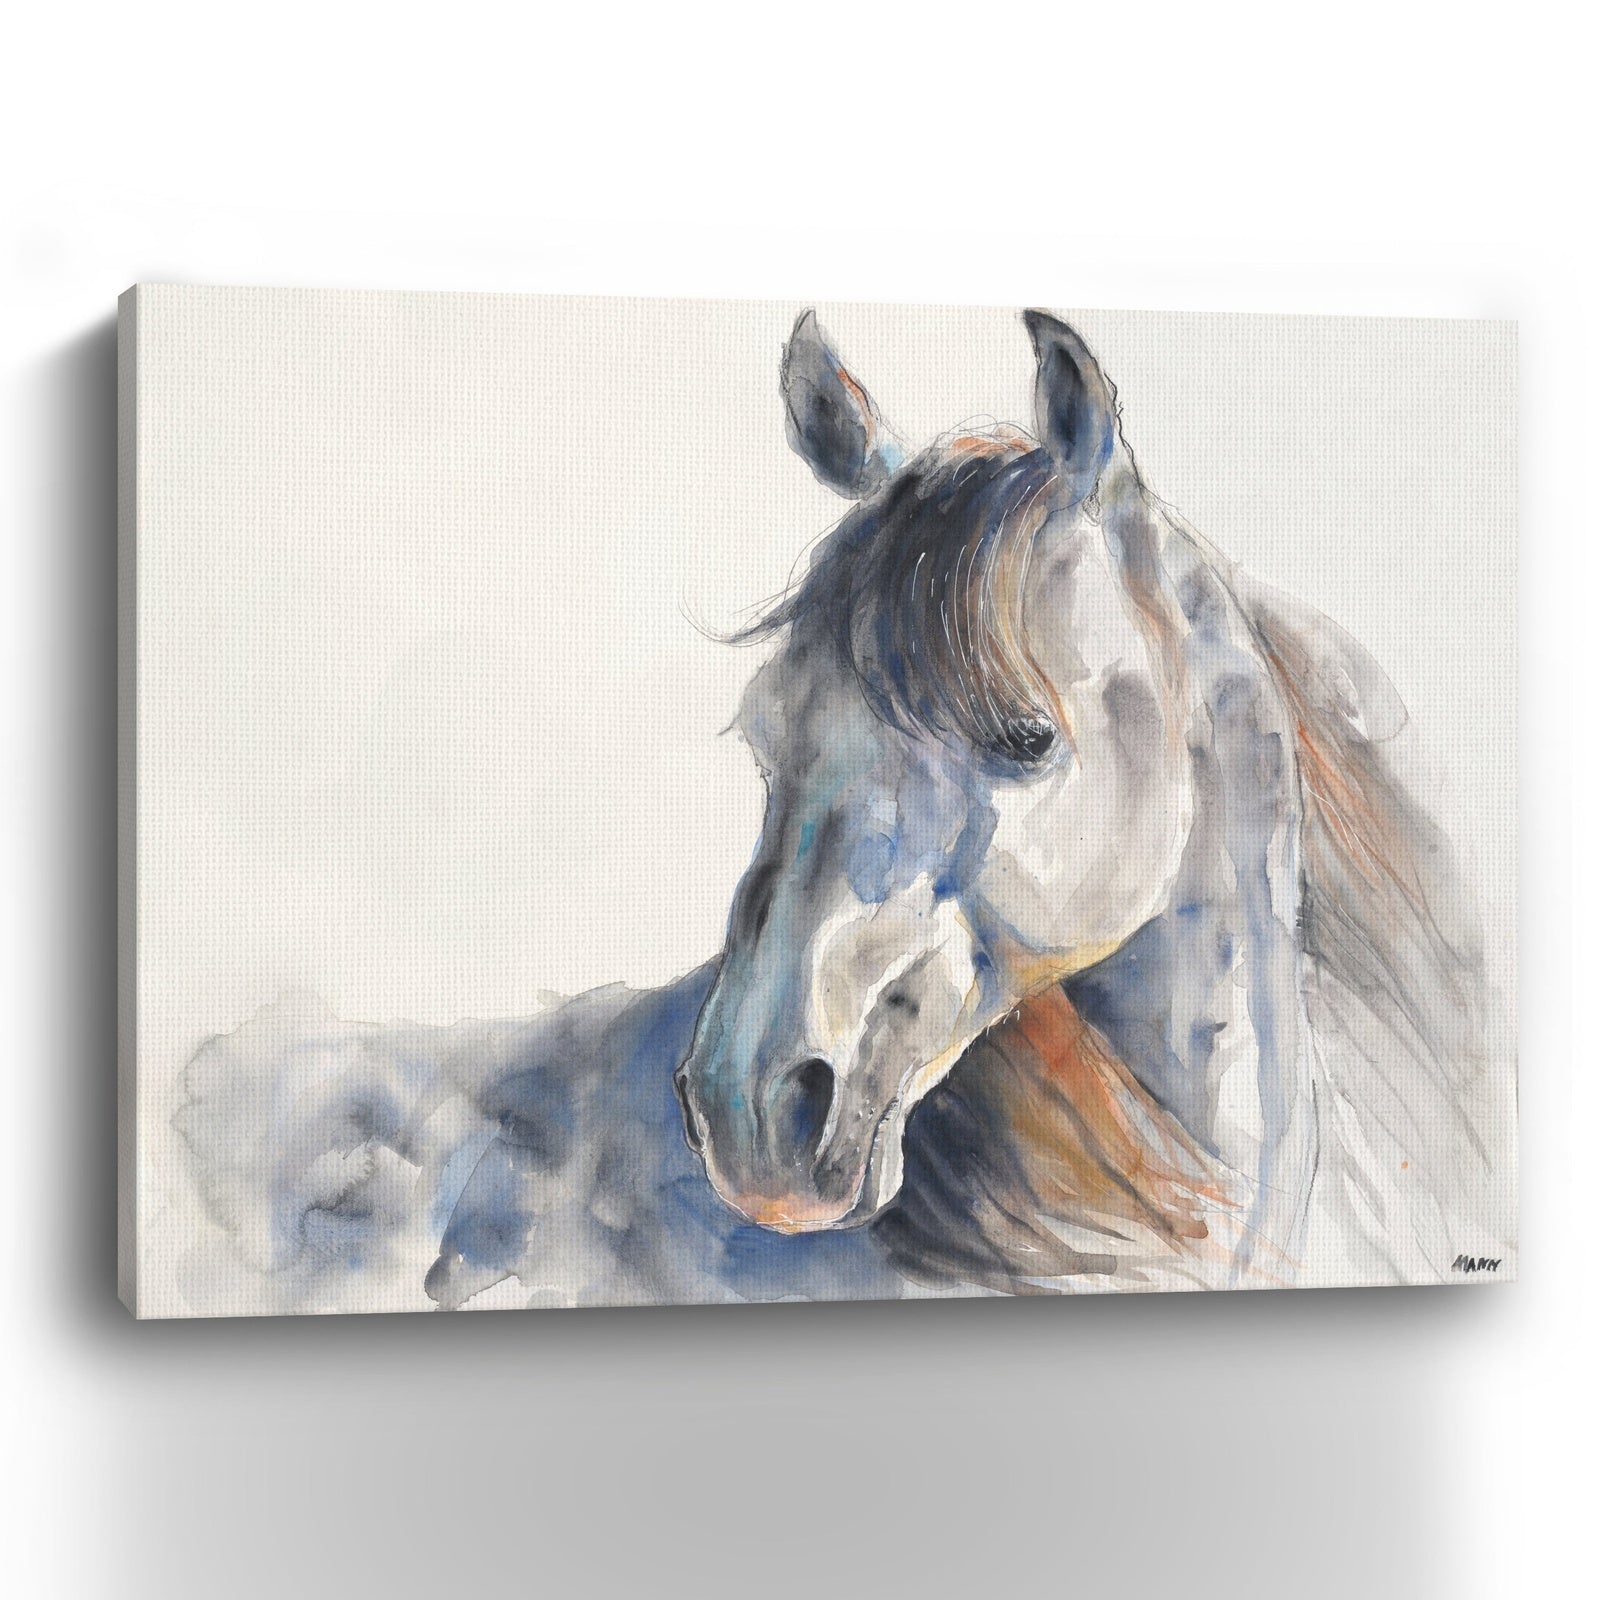 LOOKING BACK Canvas Giclee - Wall Art